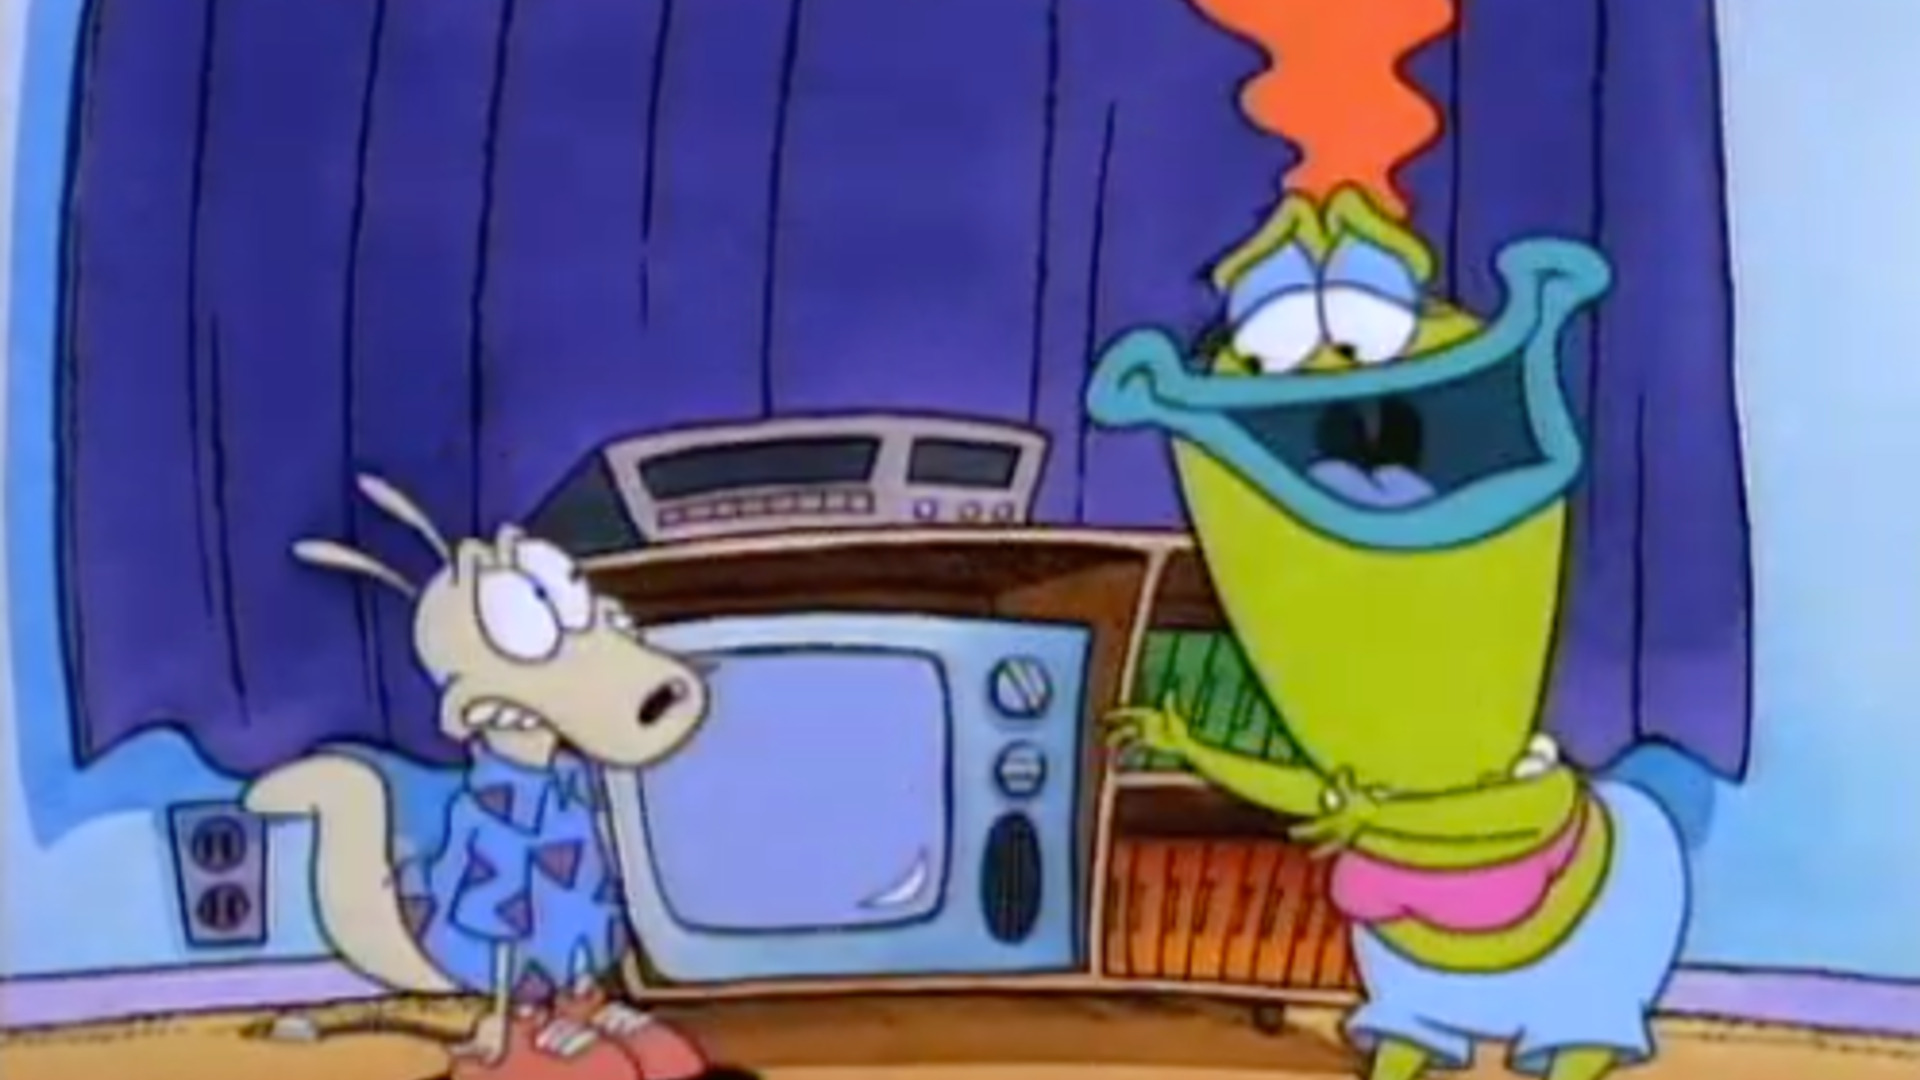 Frog from rocko's modern life